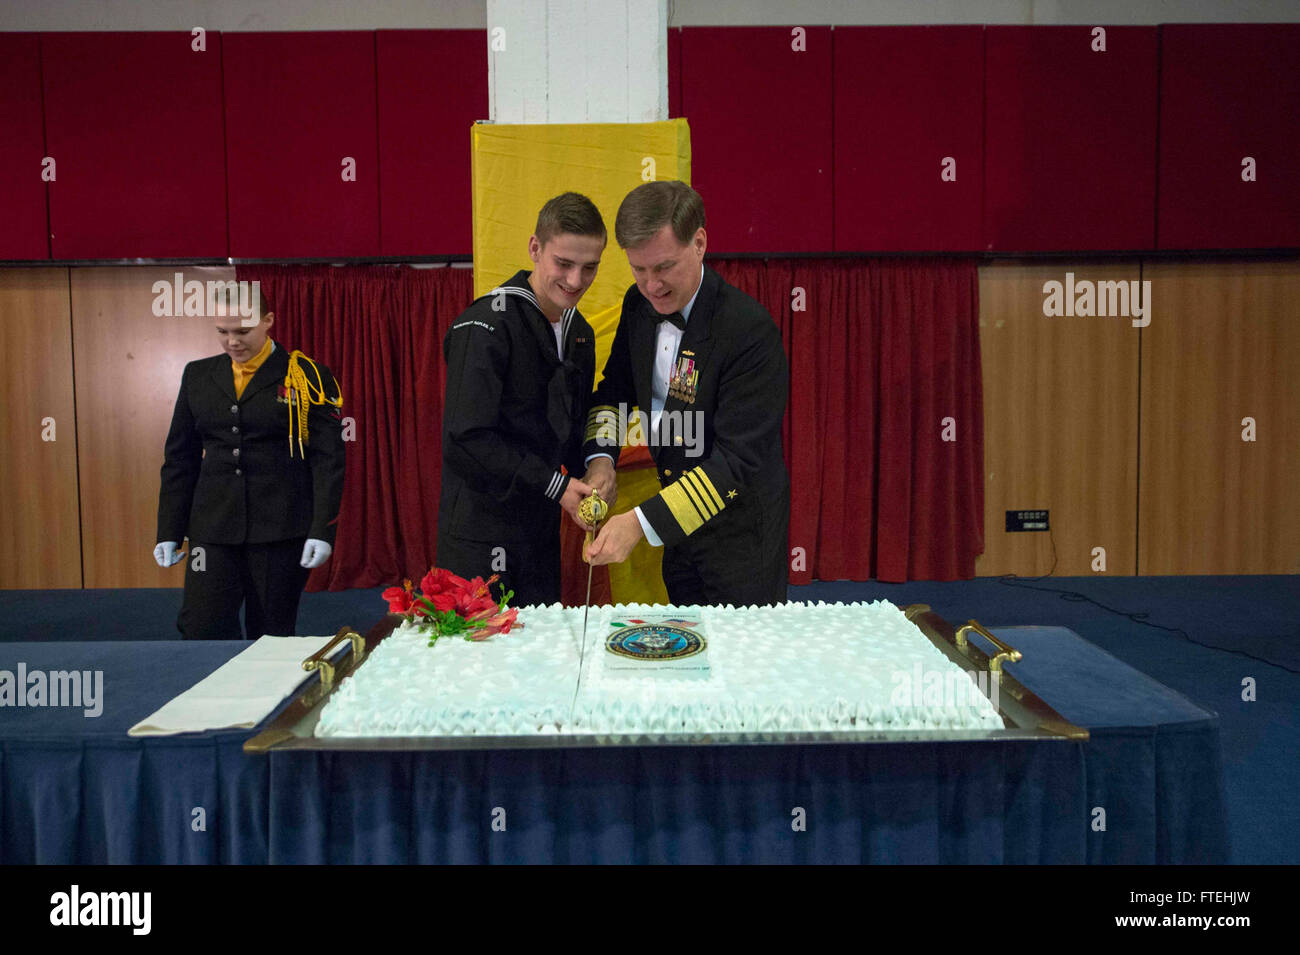 NAPLES, Italy (Oct. 18, 2014) Adm. Mark Ferguson, commander, U.S. Naval Forces Europe-Africa, participates in the Navy tradition of the oldest and youngest Sailors cutting the ceremonial cake during the Naples Area Navy Ball. The theme for this year’s Navy 239th birthday is thanking those who support us. Stock Photo